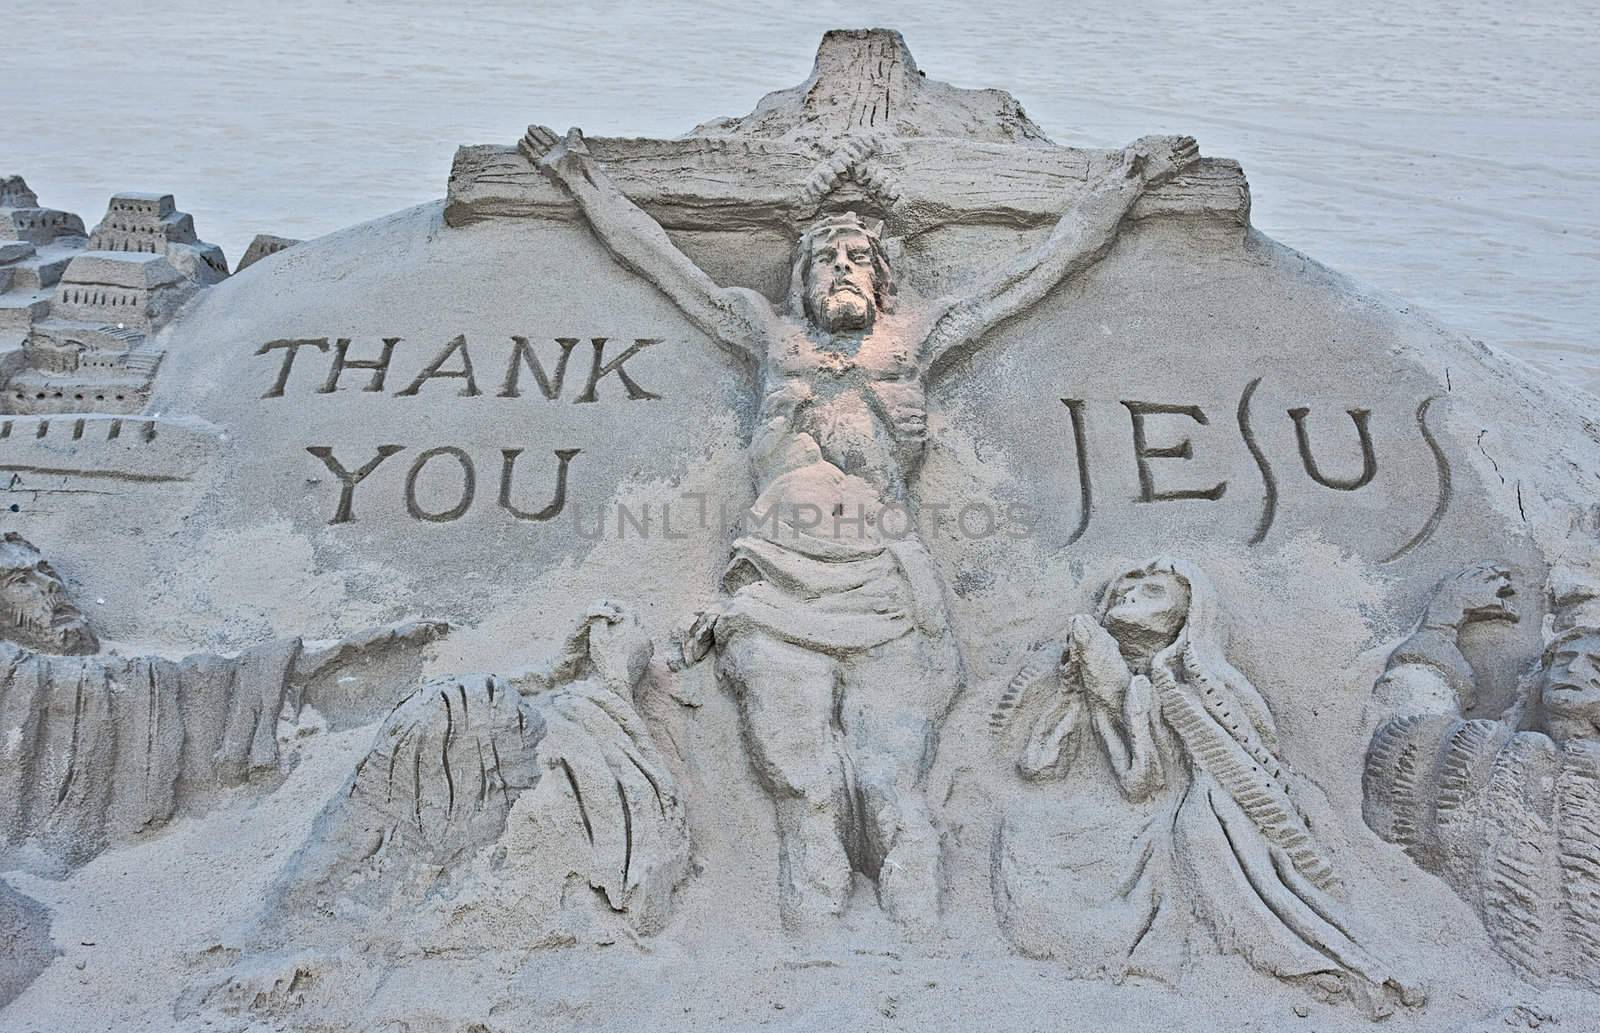 A sand sculpture on a beach of the crucifixion of Jesus